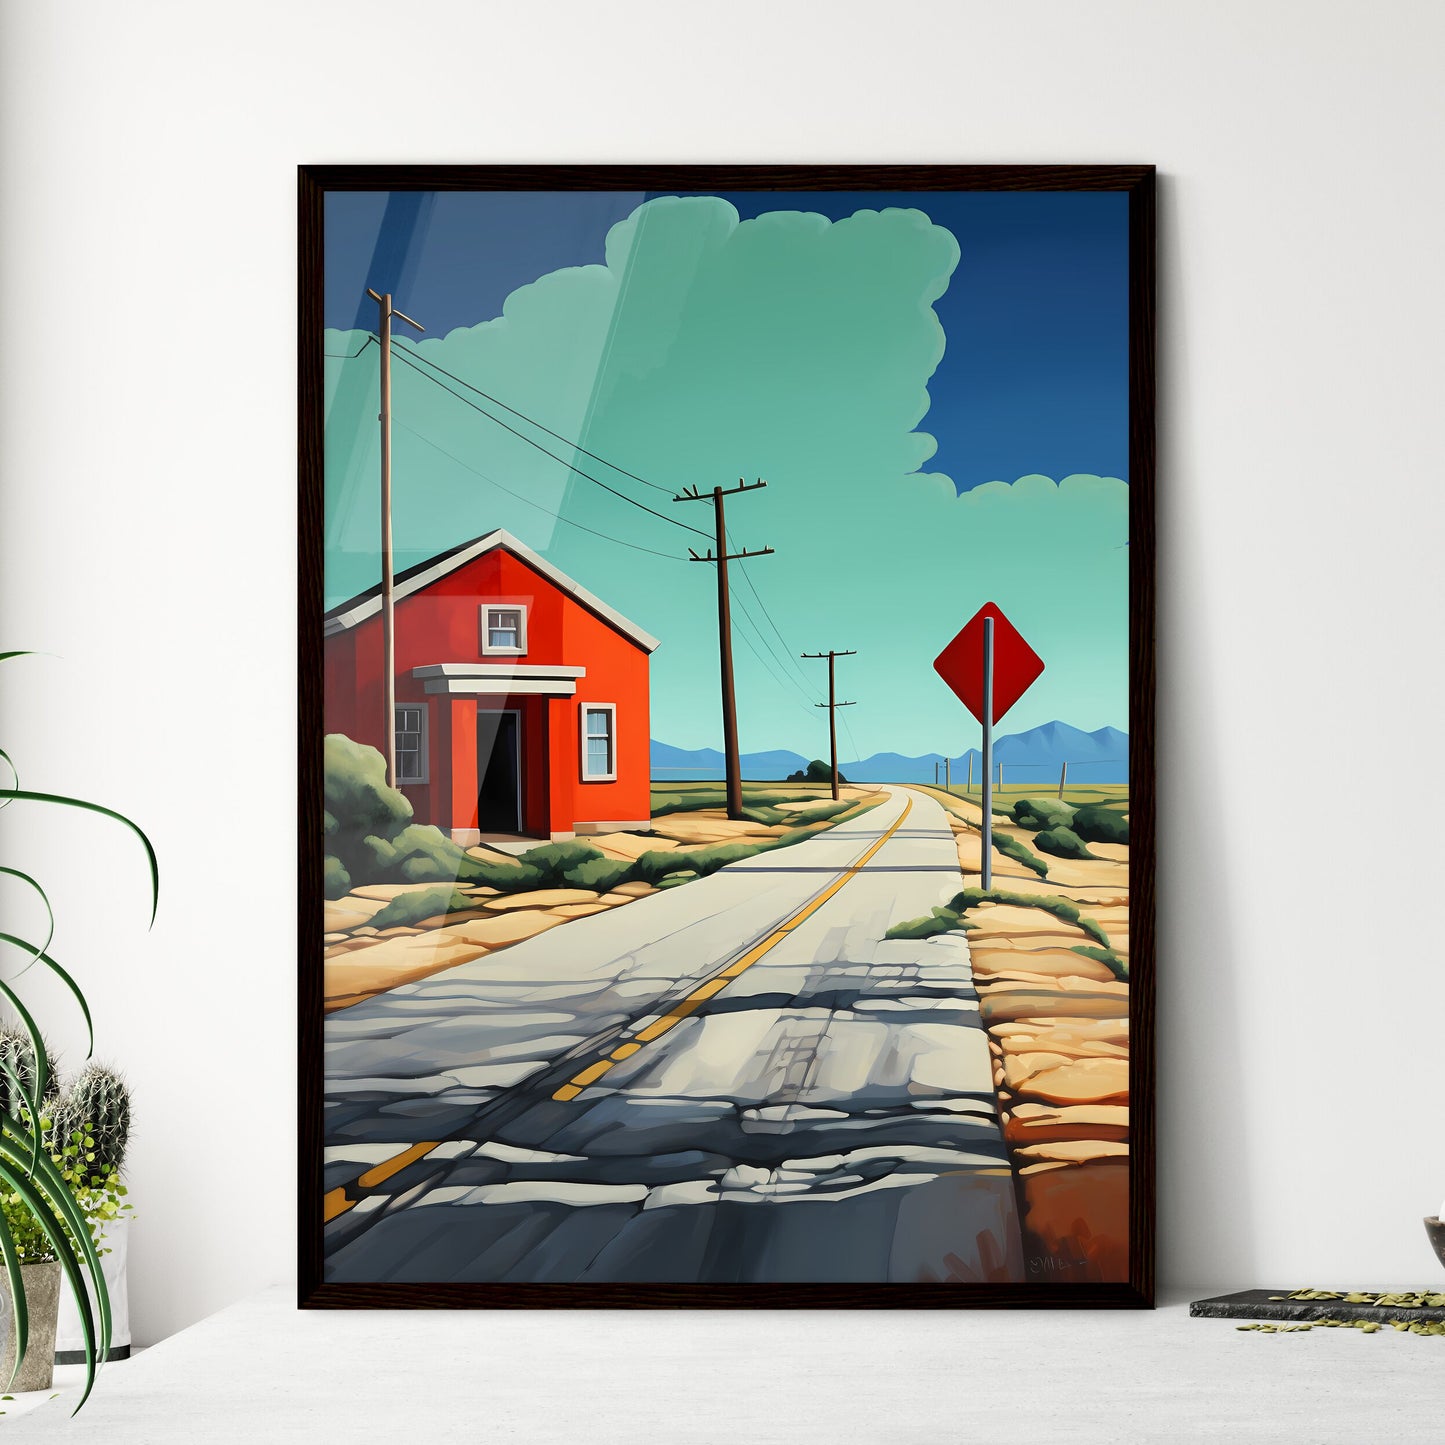 A Poster of end of the road - A Red House On A Road Default Title